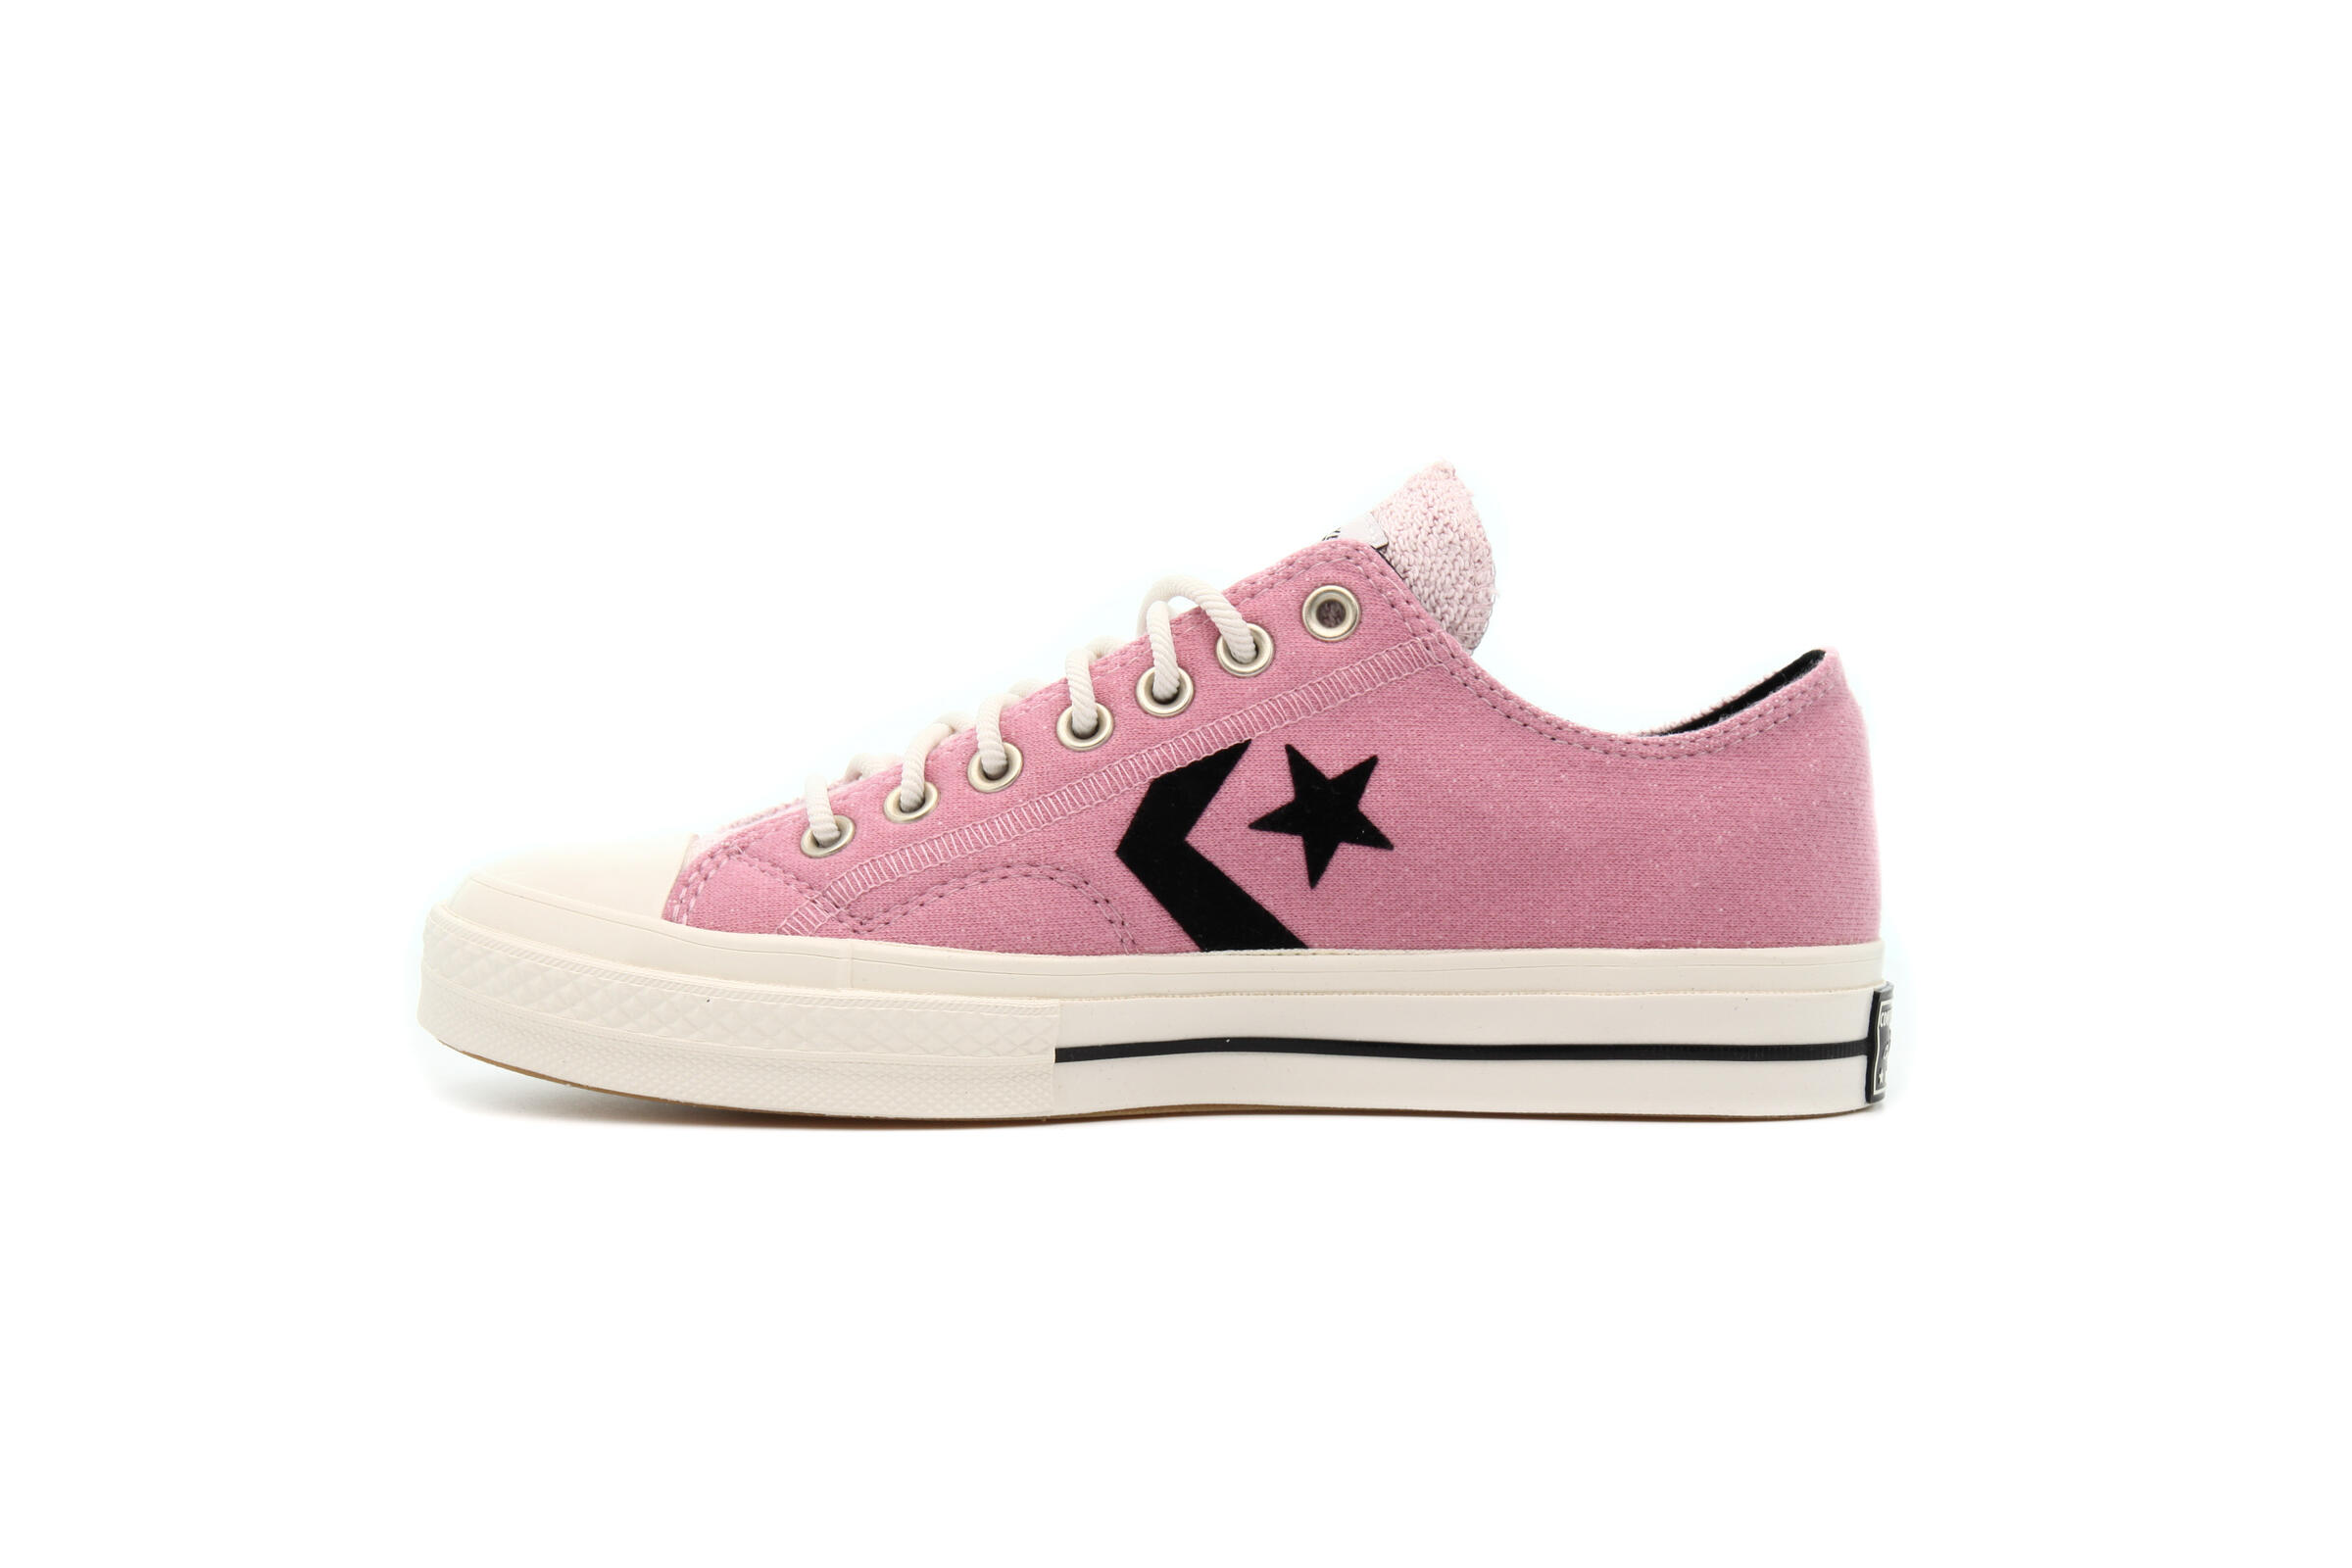 Converse x CONVERSE STAR PLAYER OX REVERSE TERRY "LOTUS PINK"